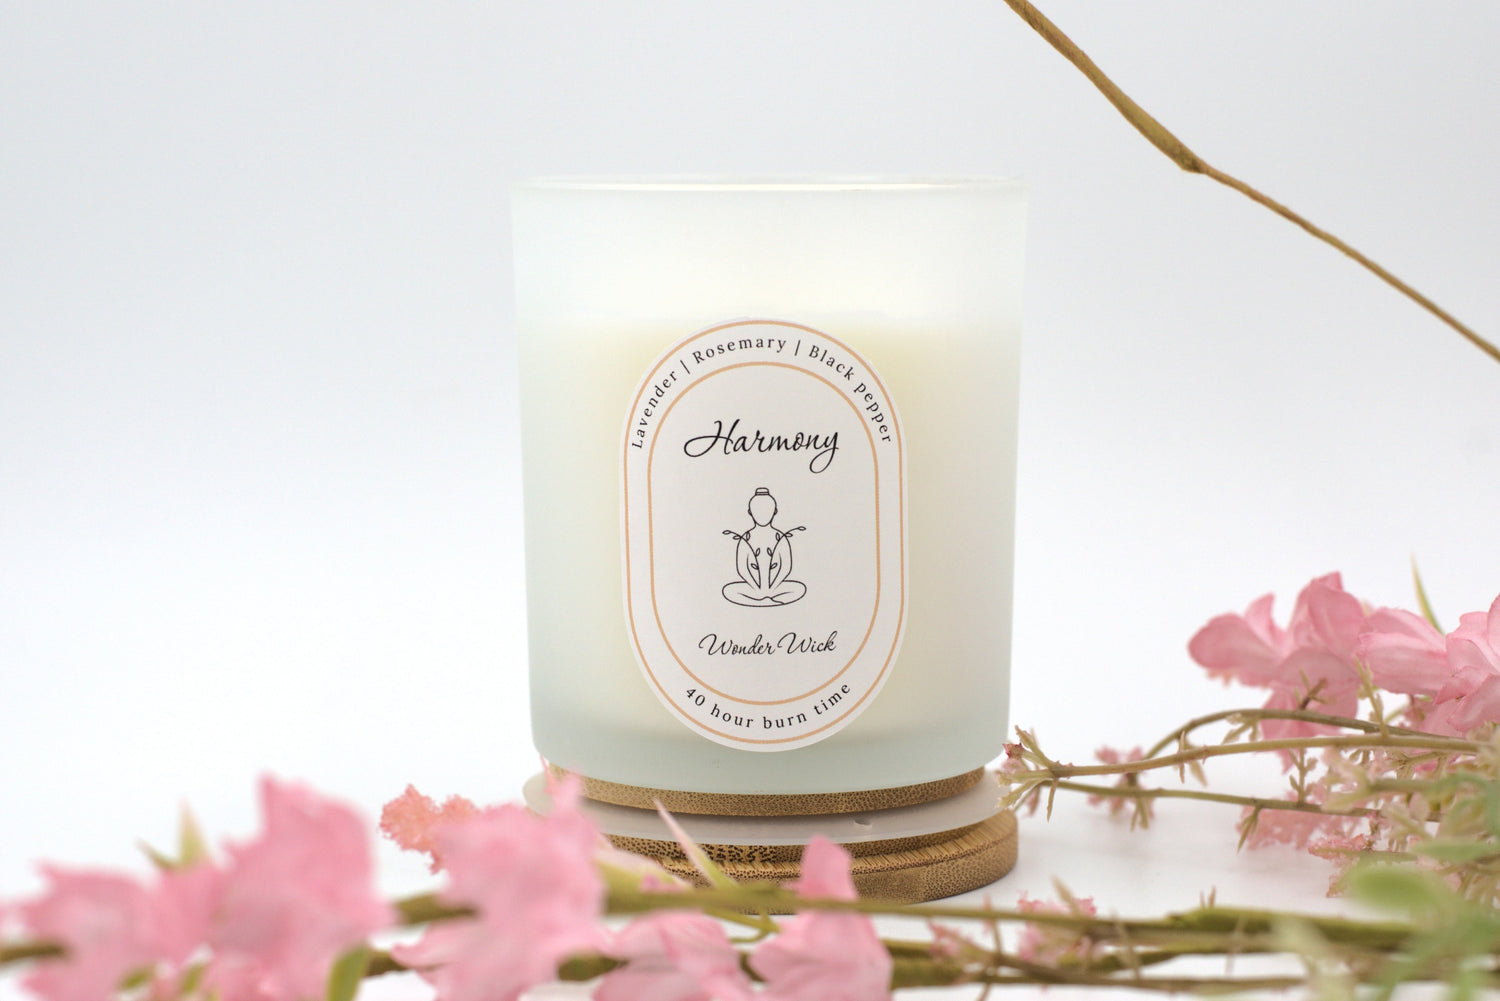 Harmony candle for relaxation made with essential oils lavender, rosemary and black pepper